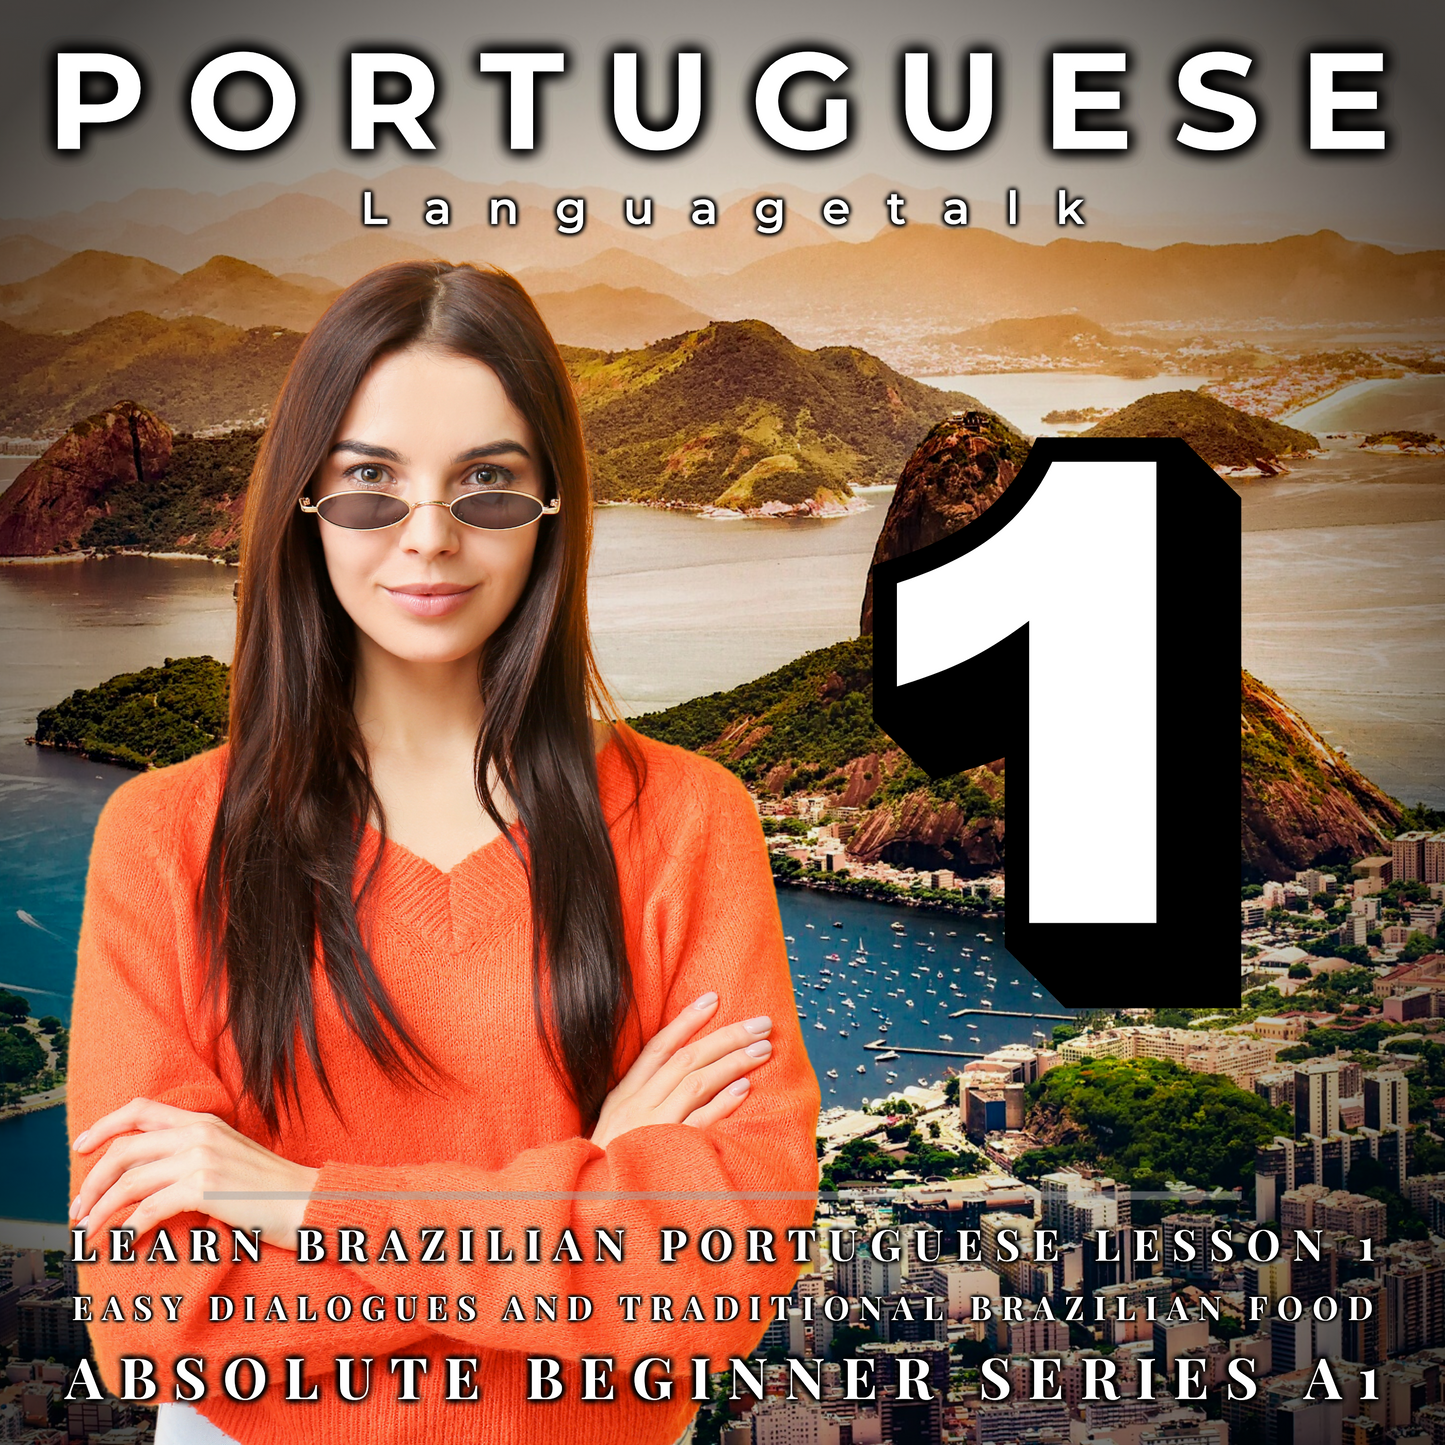 Learn Brazilian Portuguese Lesson 1: Easy Dialogues and Traditional Brazilian Food